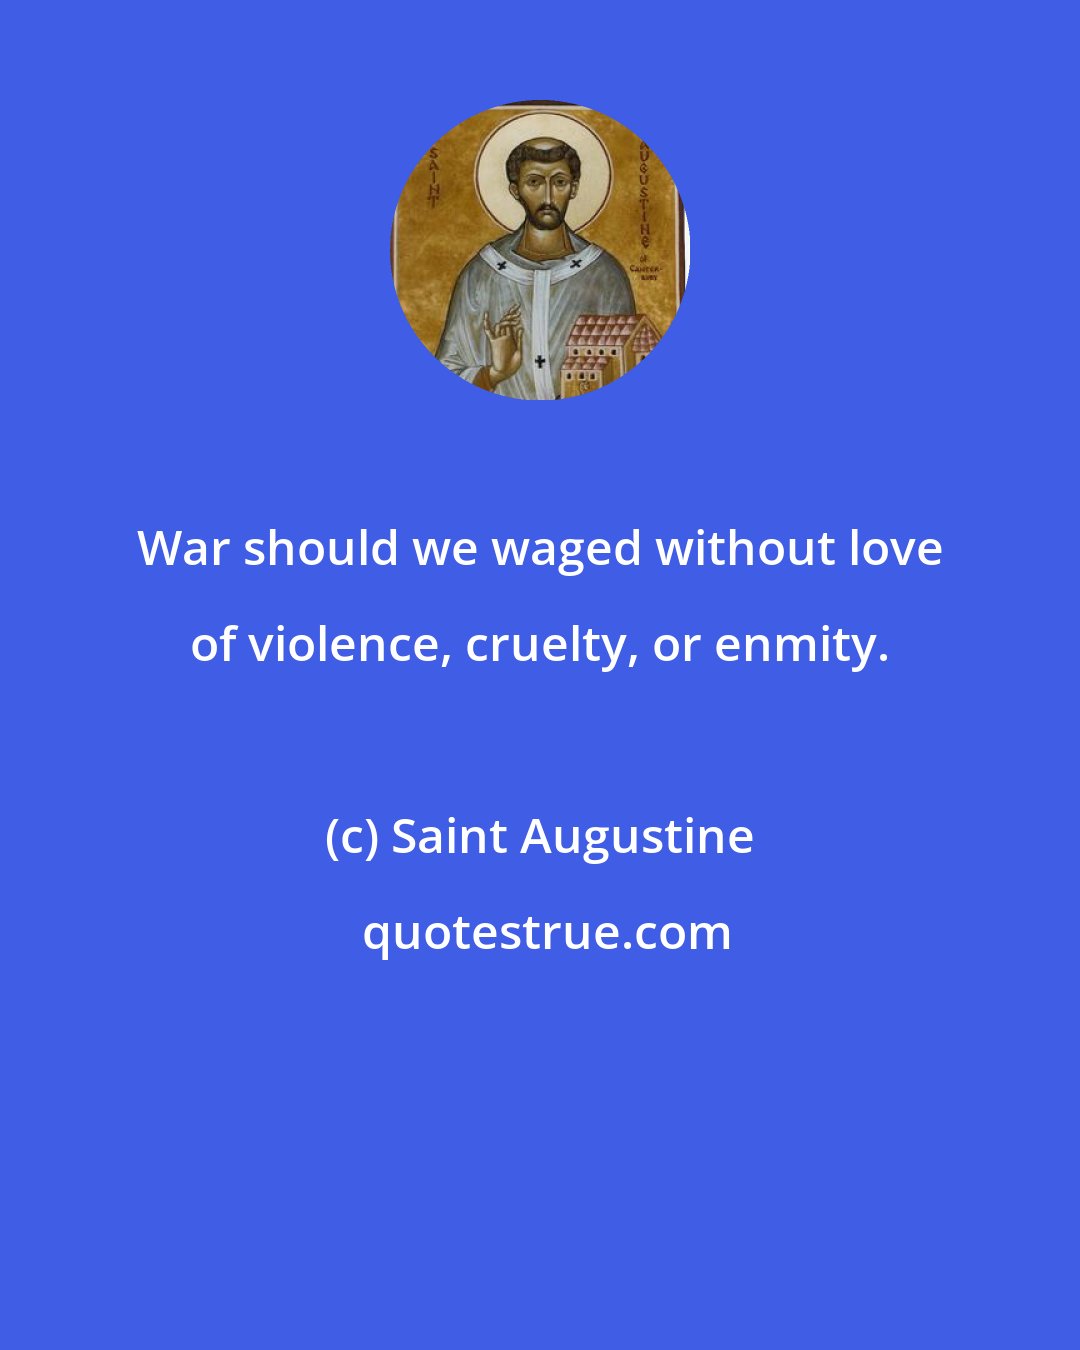 Saint Augustine: War should we waged without love of violence, cruelty, or enmity.